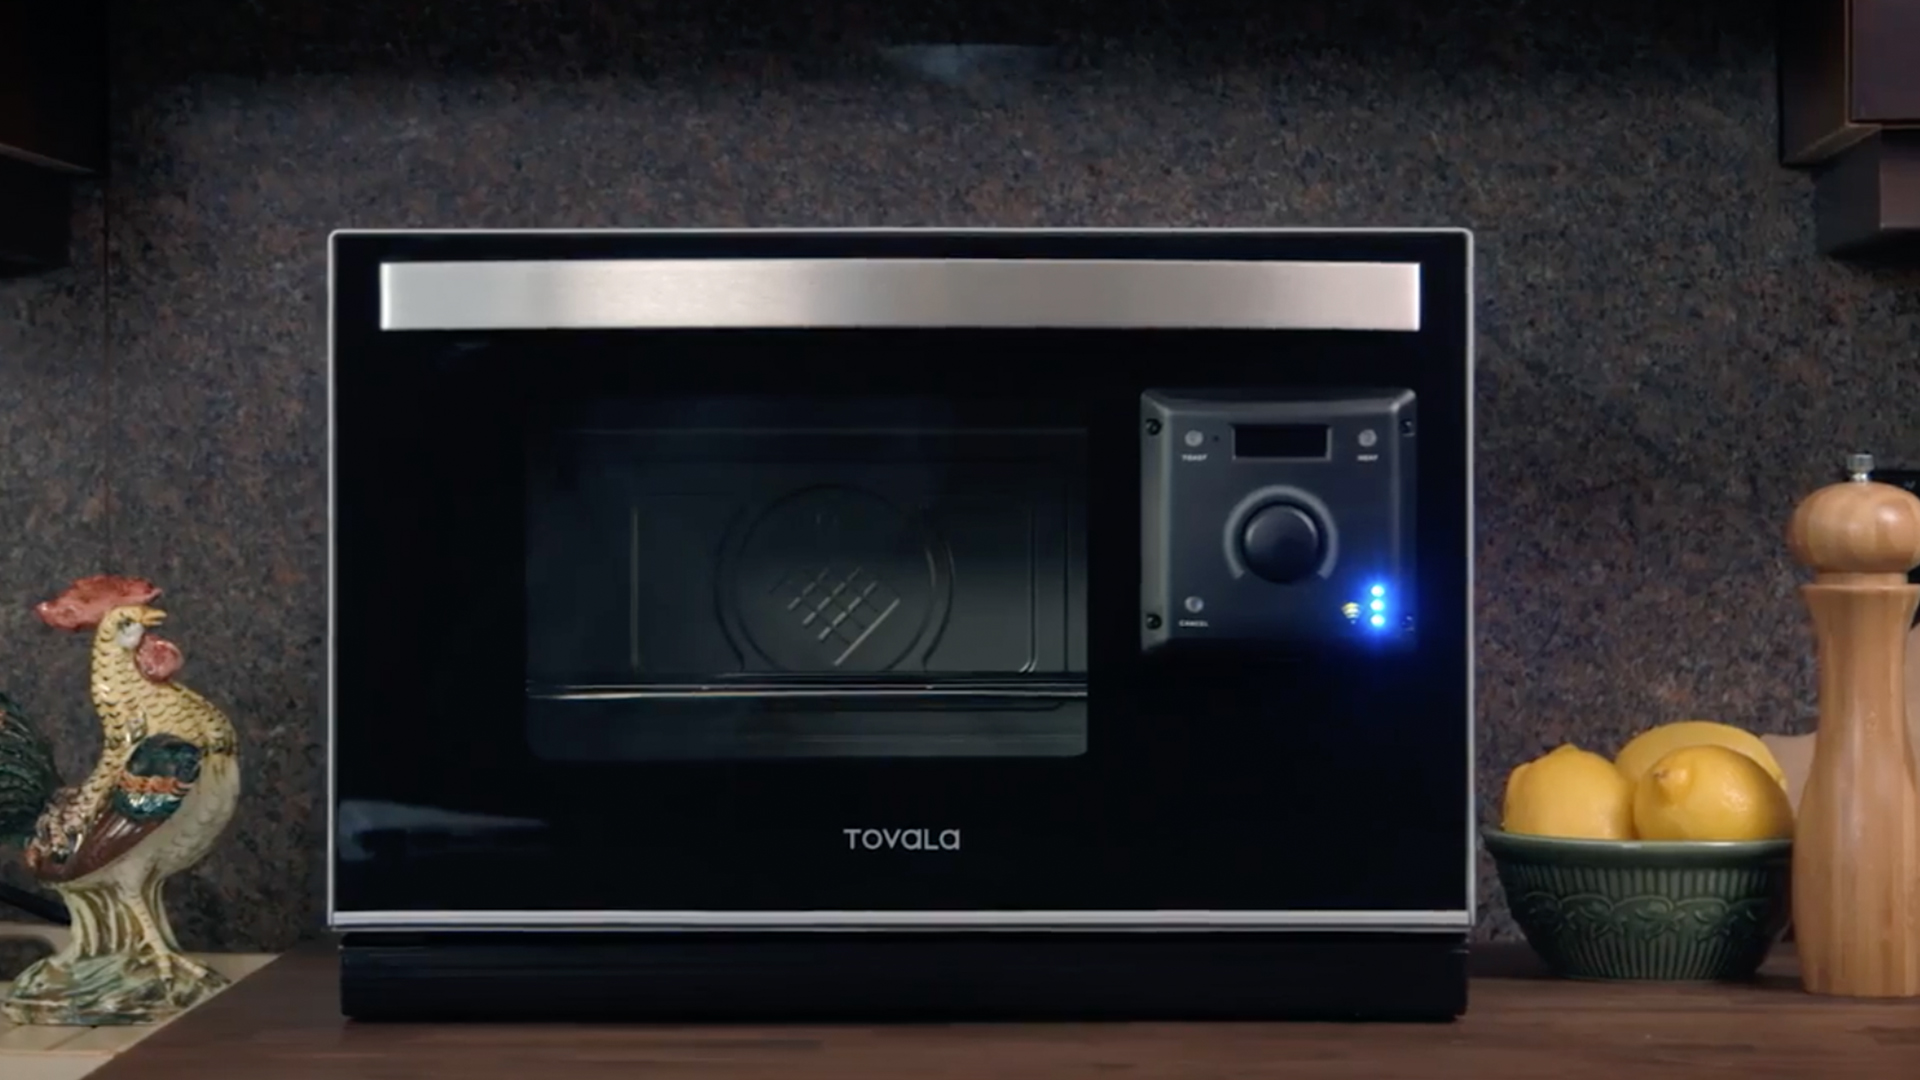 New Smart Oven From Tovala: How It Works